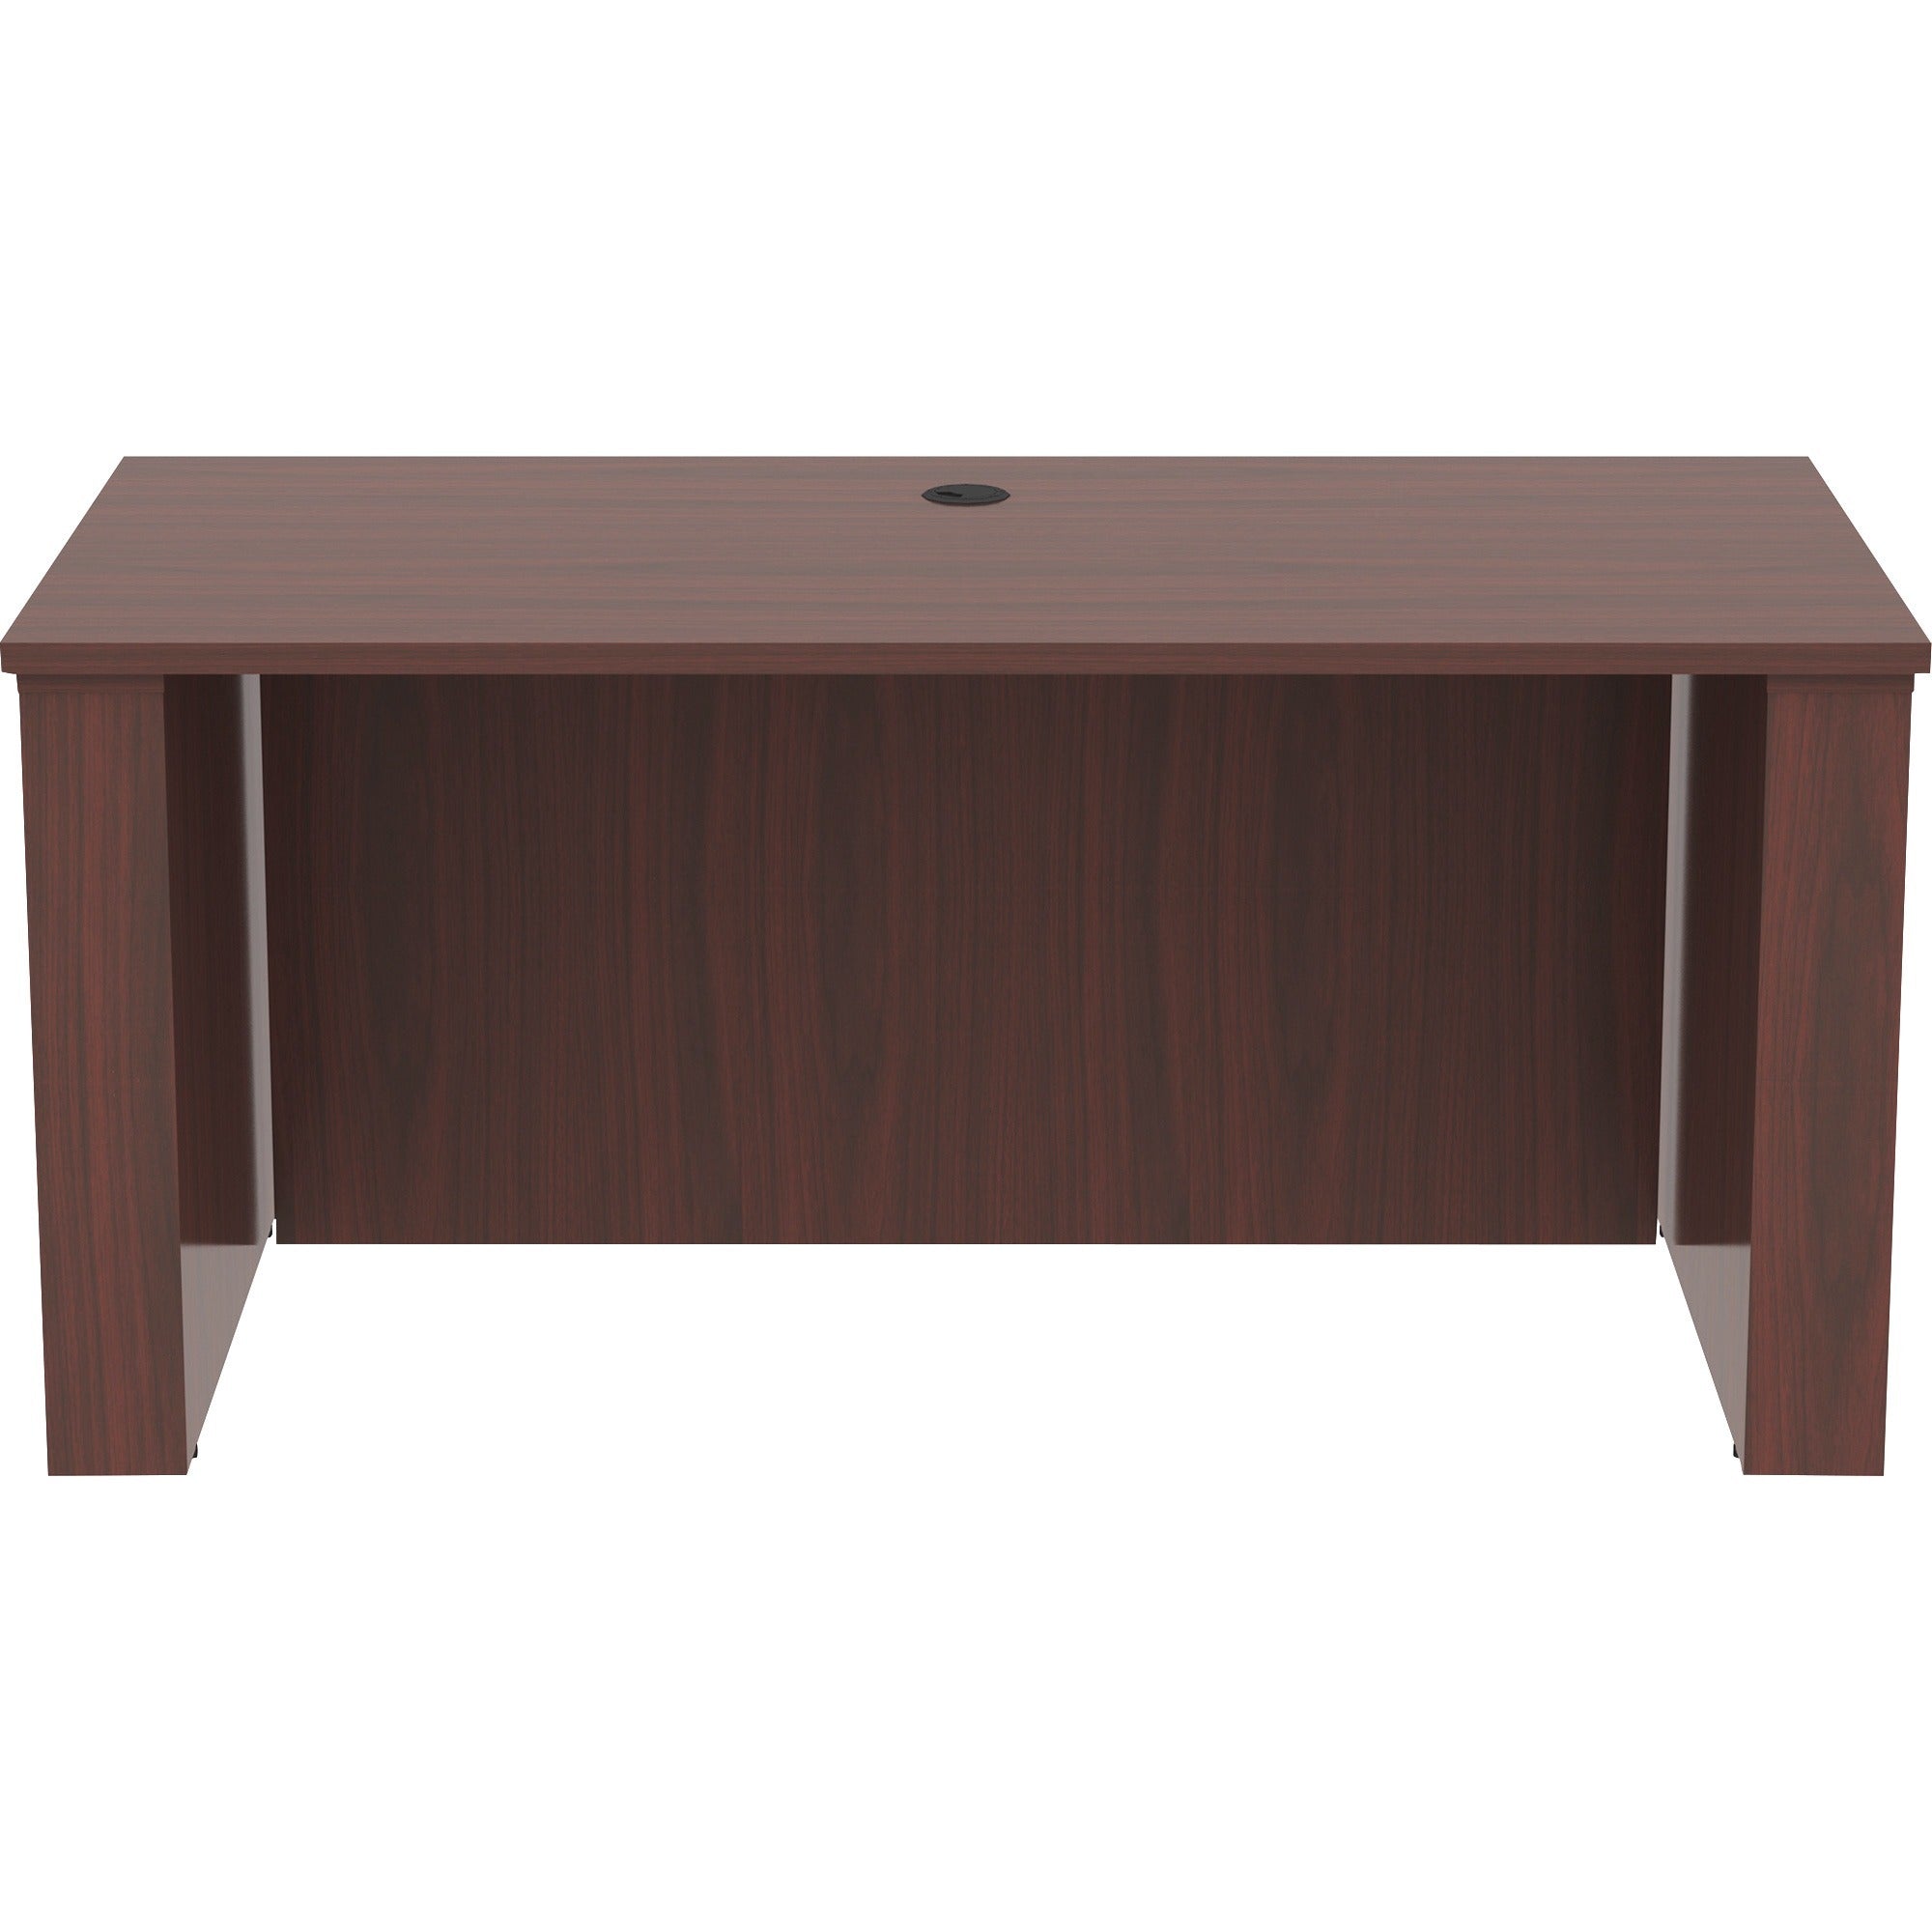 lorell-essentials-series-sit-to-stand-desk-shell-01-top-1-edge-60-x-2949-finish-mahogany-mahogany-laminate-table-top_llr69571 - 2